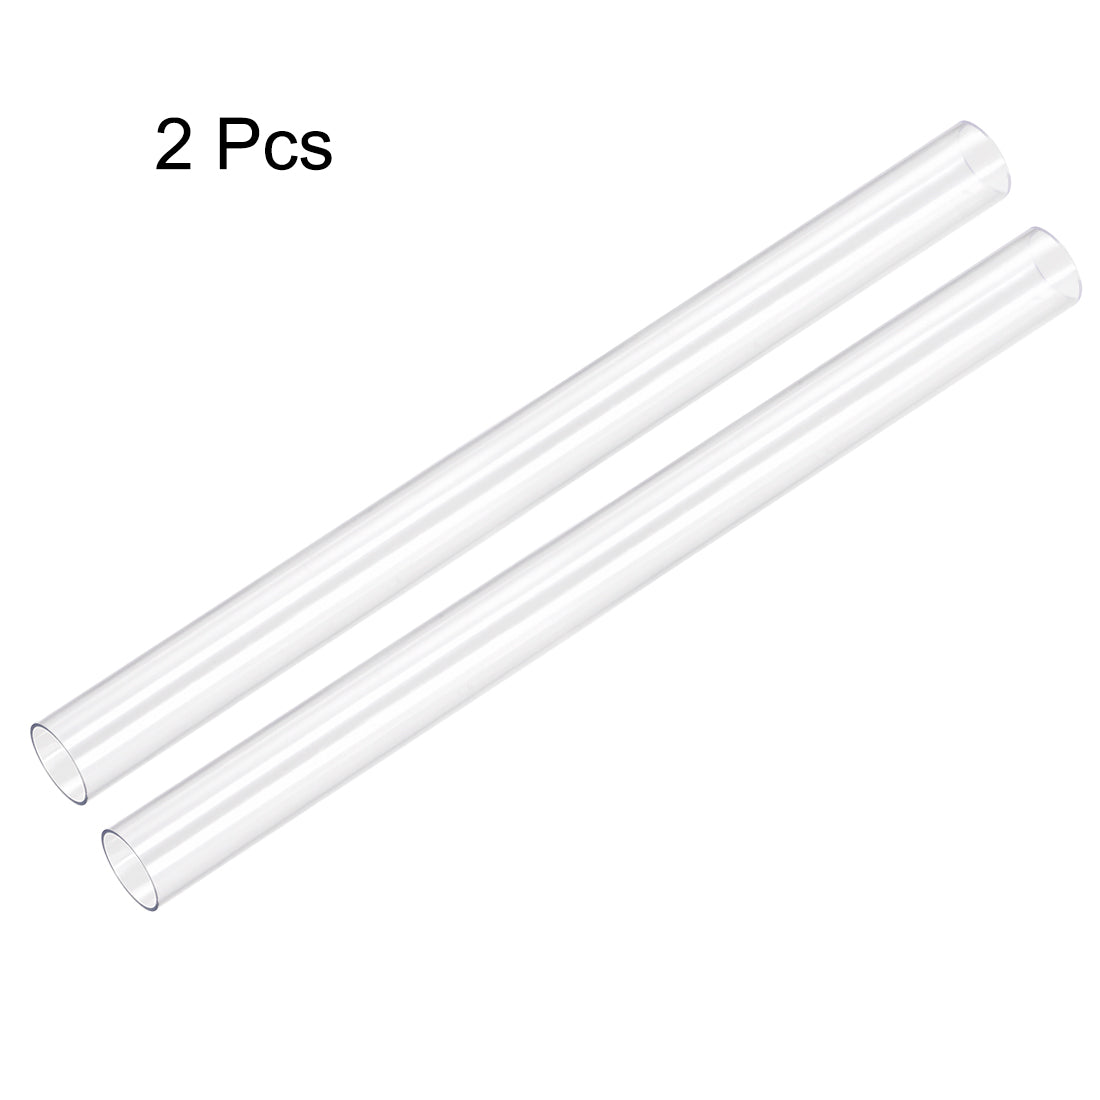 uxcell Uxcell PC Rigid Round Clear Tubing, 17mm ID x 20mm OD, 0.5M/1.64Ft Length 2pcs